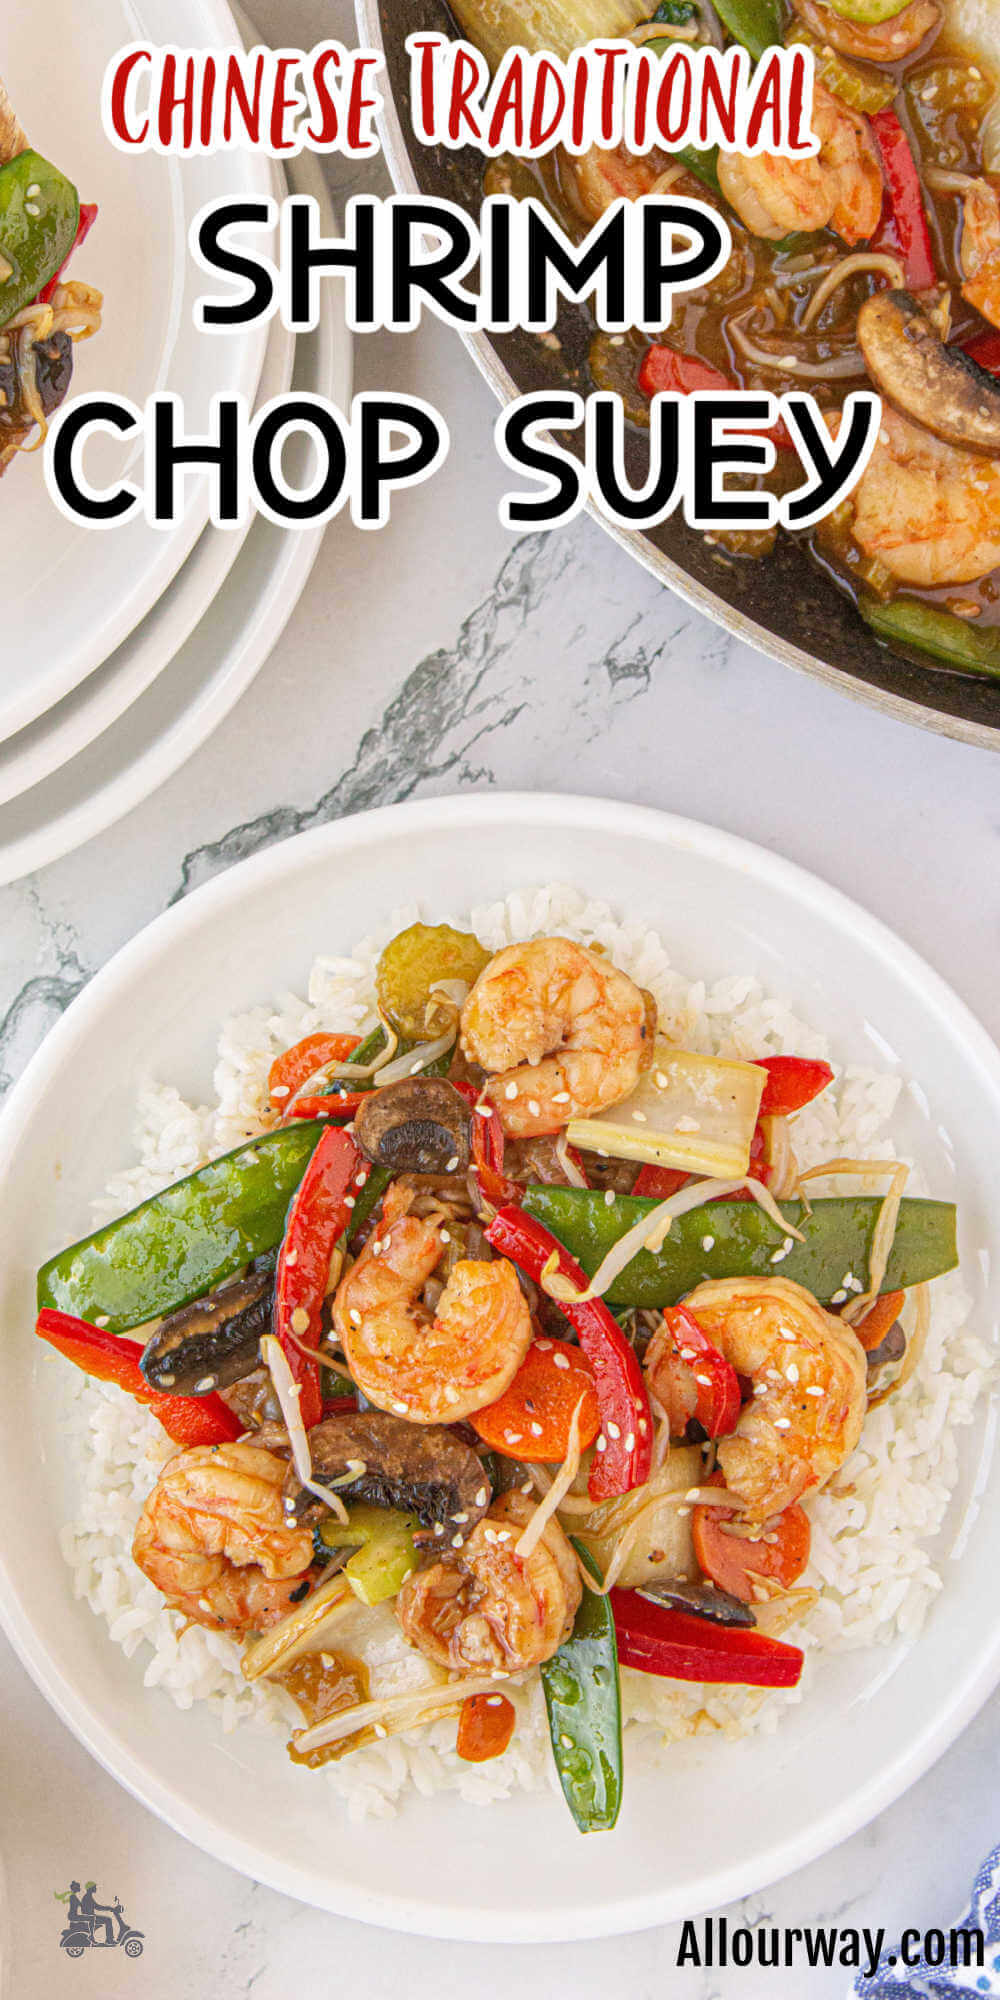 Pinterest image with title overlay for traditional Chinese Shrimp Chop Suey recipe.